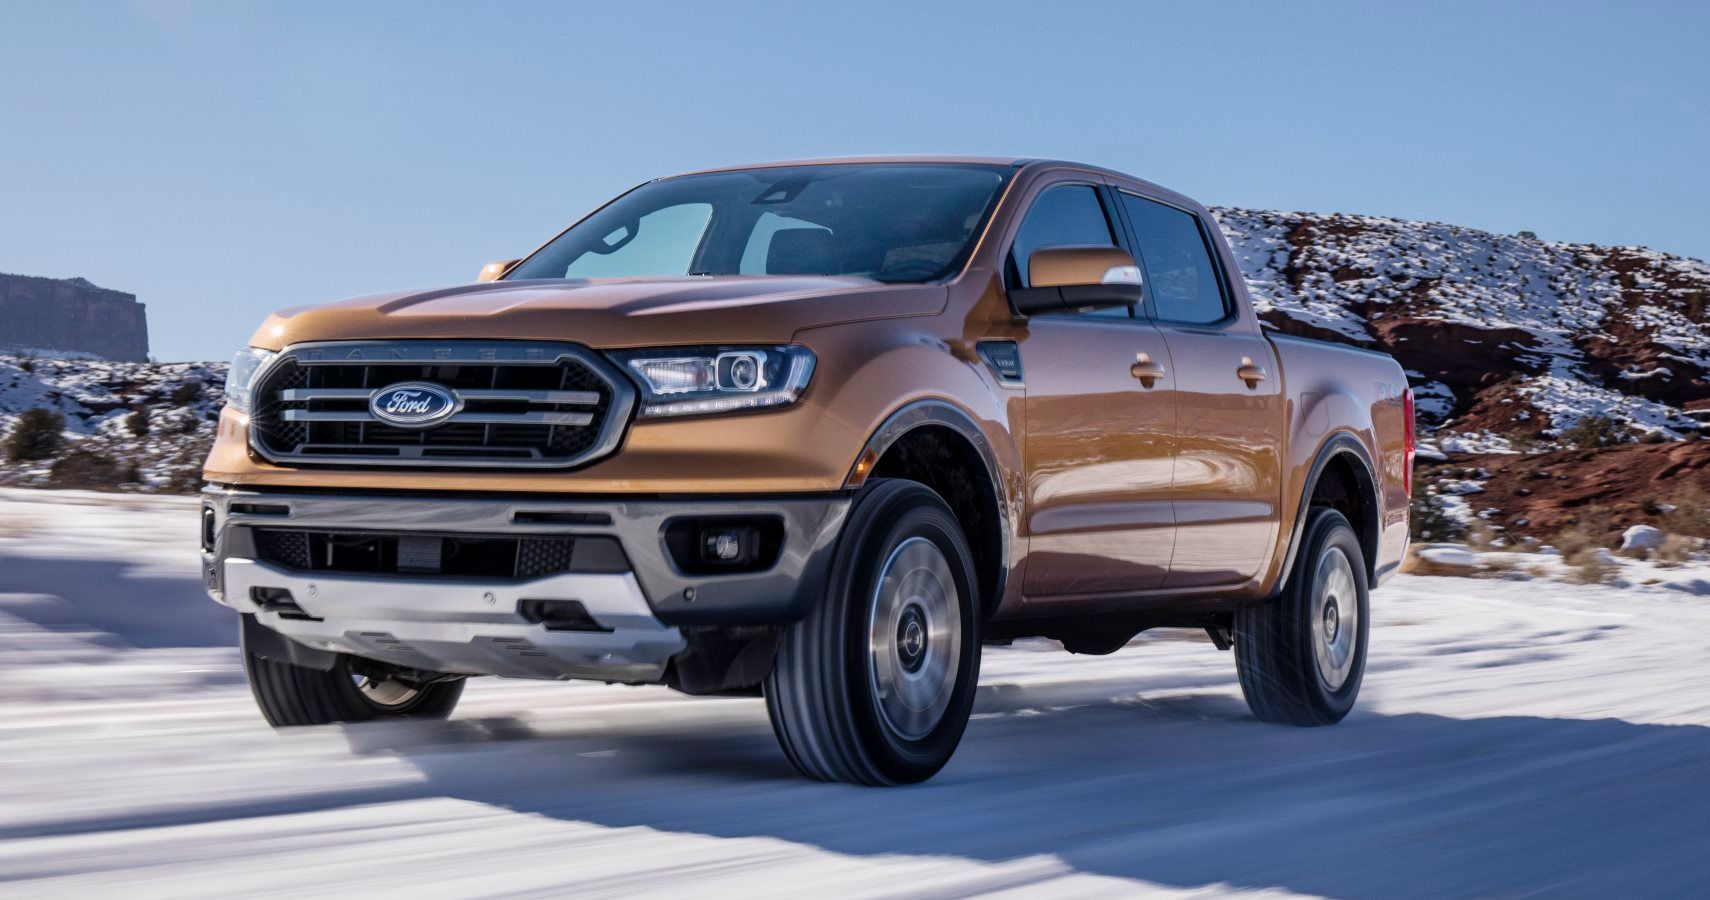 2019 Ford Ranger Comes With Multiple Off-Road Options: Here’s What It Will Cost